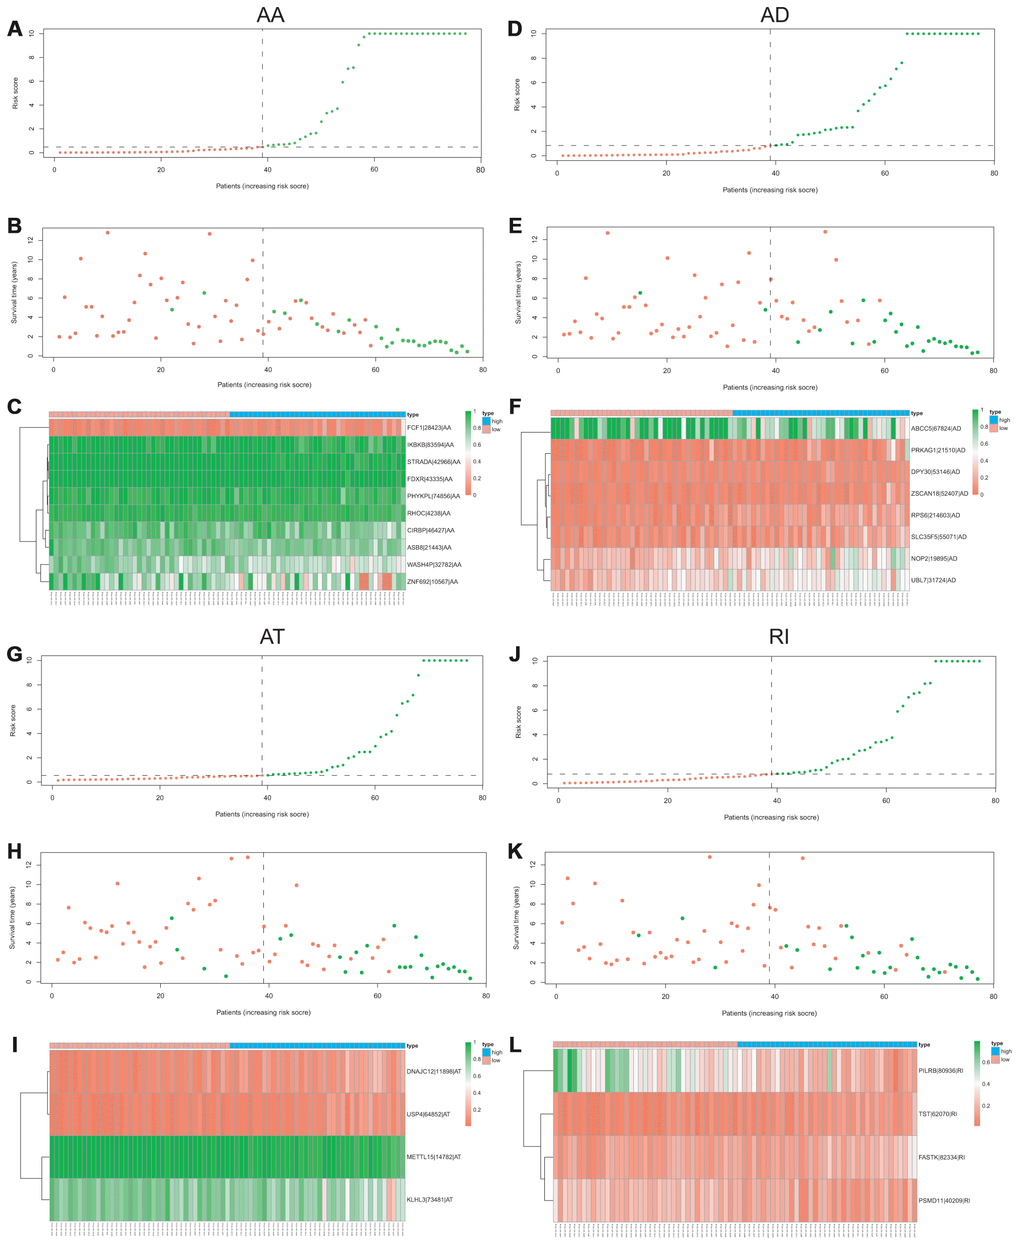 The distribution of risk score, the distribution of survival time, the expression Heatmap of the most four significant prognostic signatures with AUC > 0.9. AA cohort (A–C), AD cohort (D–F), AT cohort (G–I), and RI cohort (J–L).